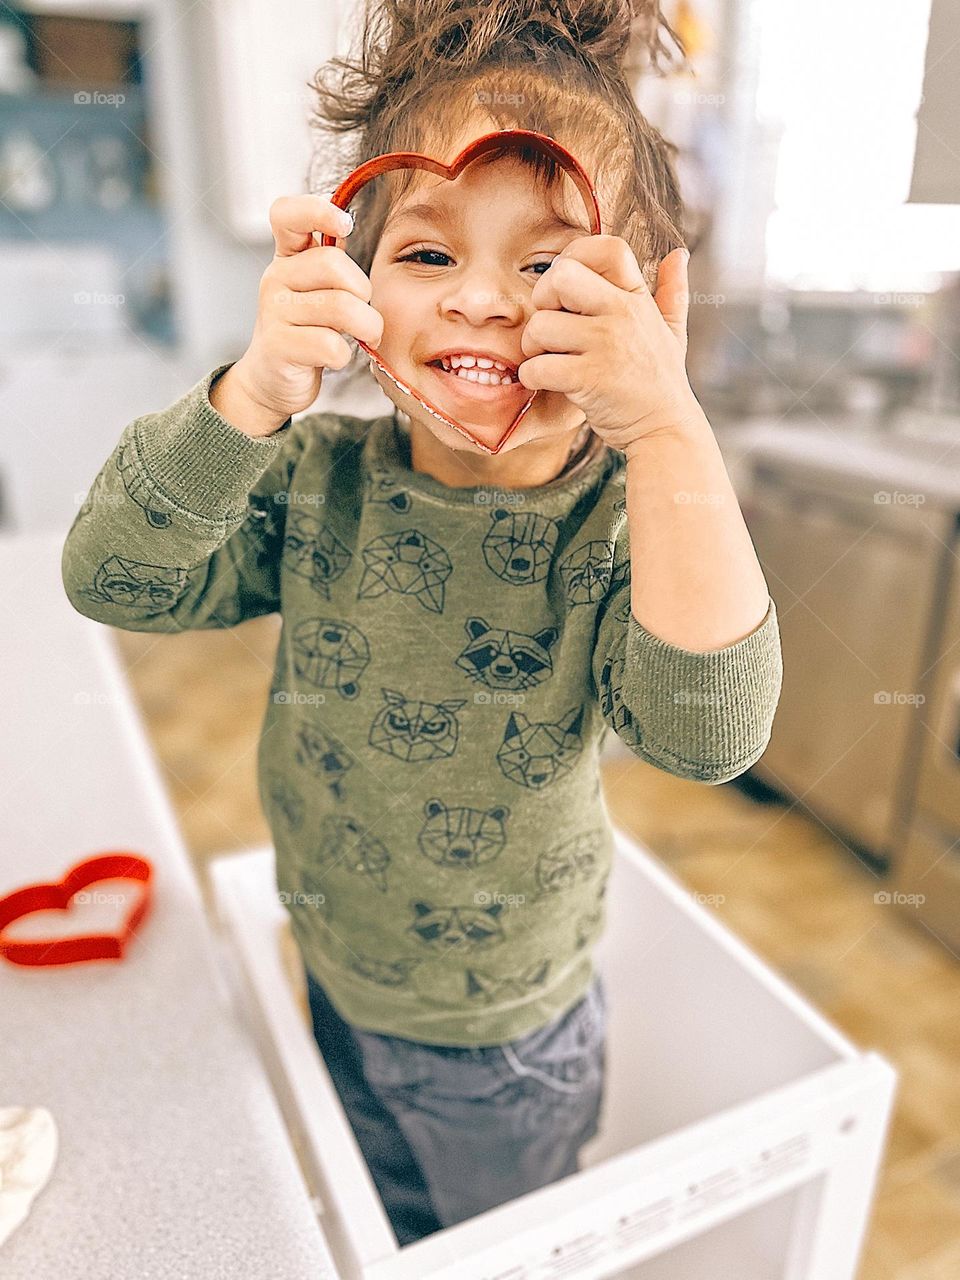 Portraits of toddlers, toddler girl being silly with cookie cutters, smartphone photography, smiling toddler makes cookies, toddler girl helps in the kitchen, fun with toddlers, cooking fun with toddlers 